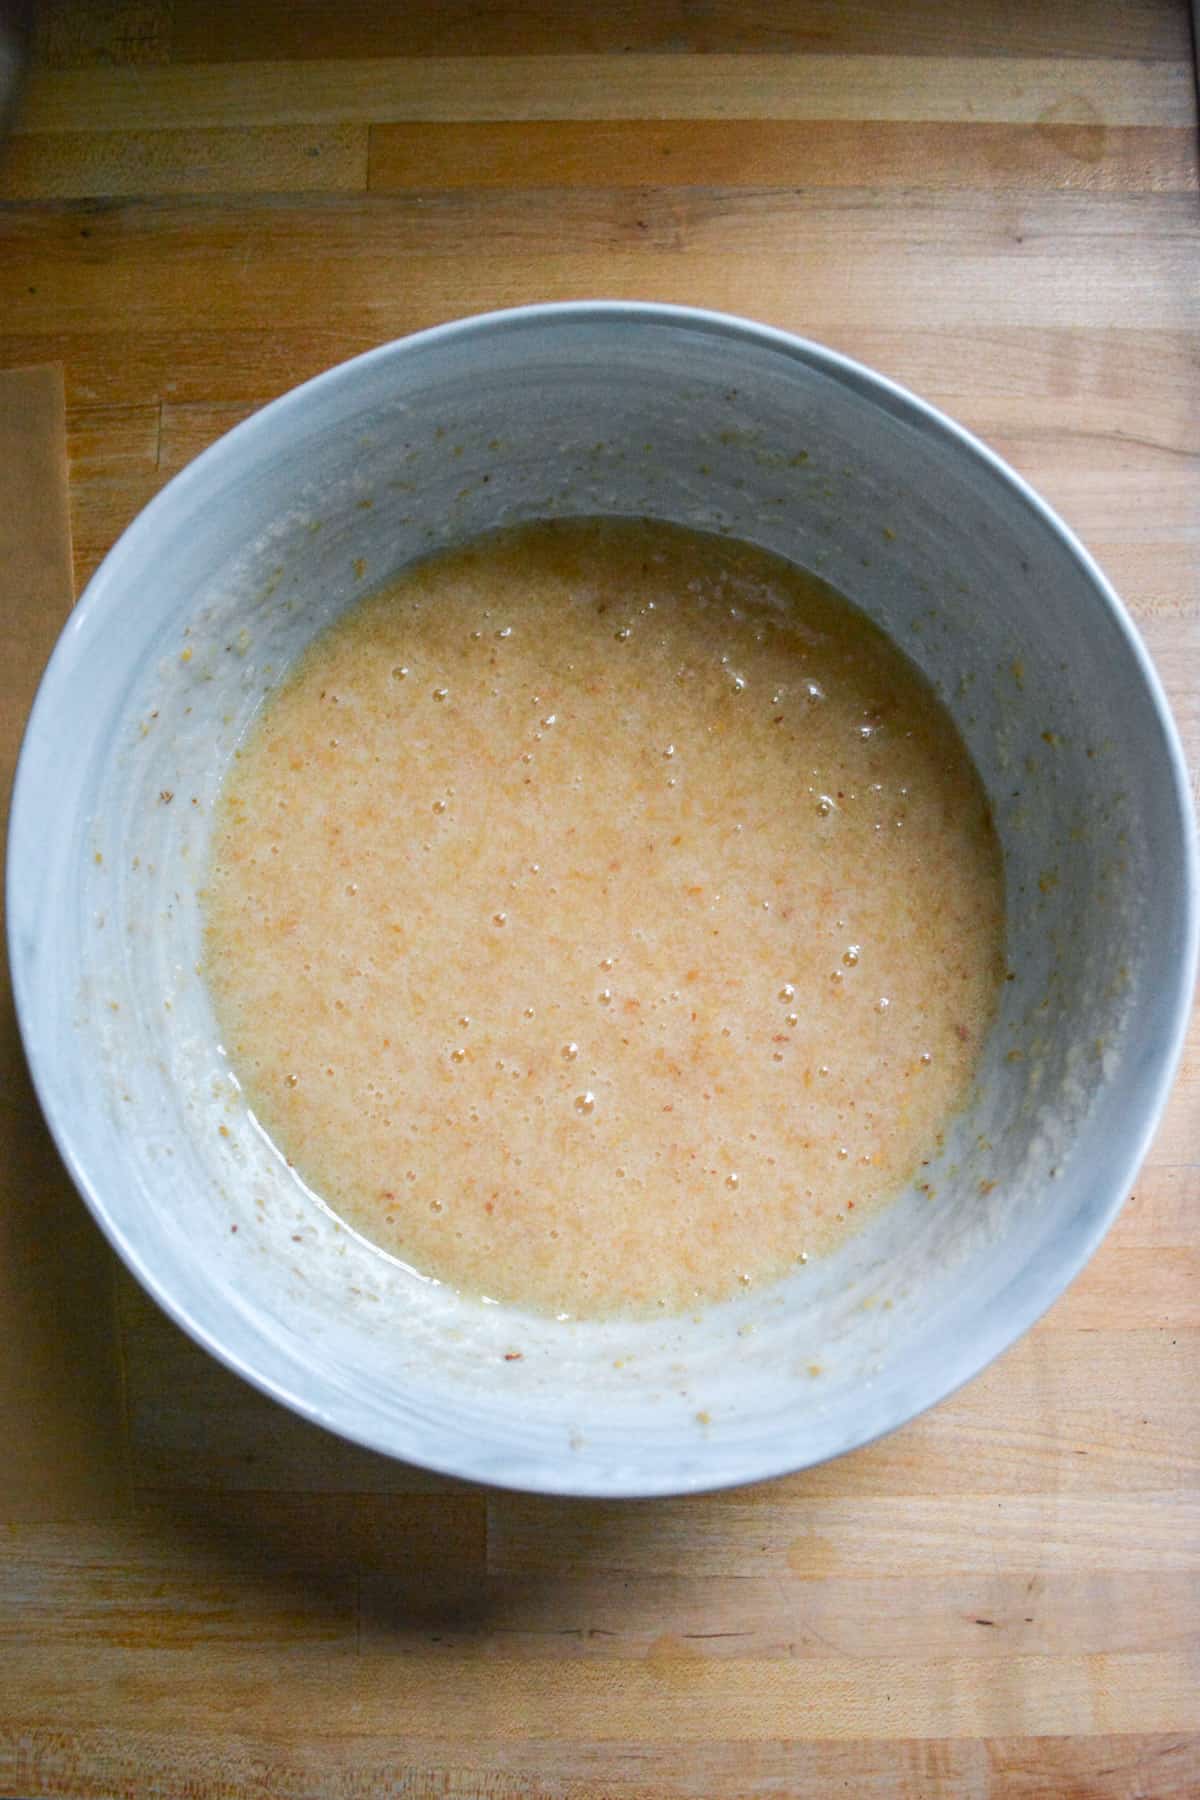 Flax egg and sugar whisked together in a mixing bowl.